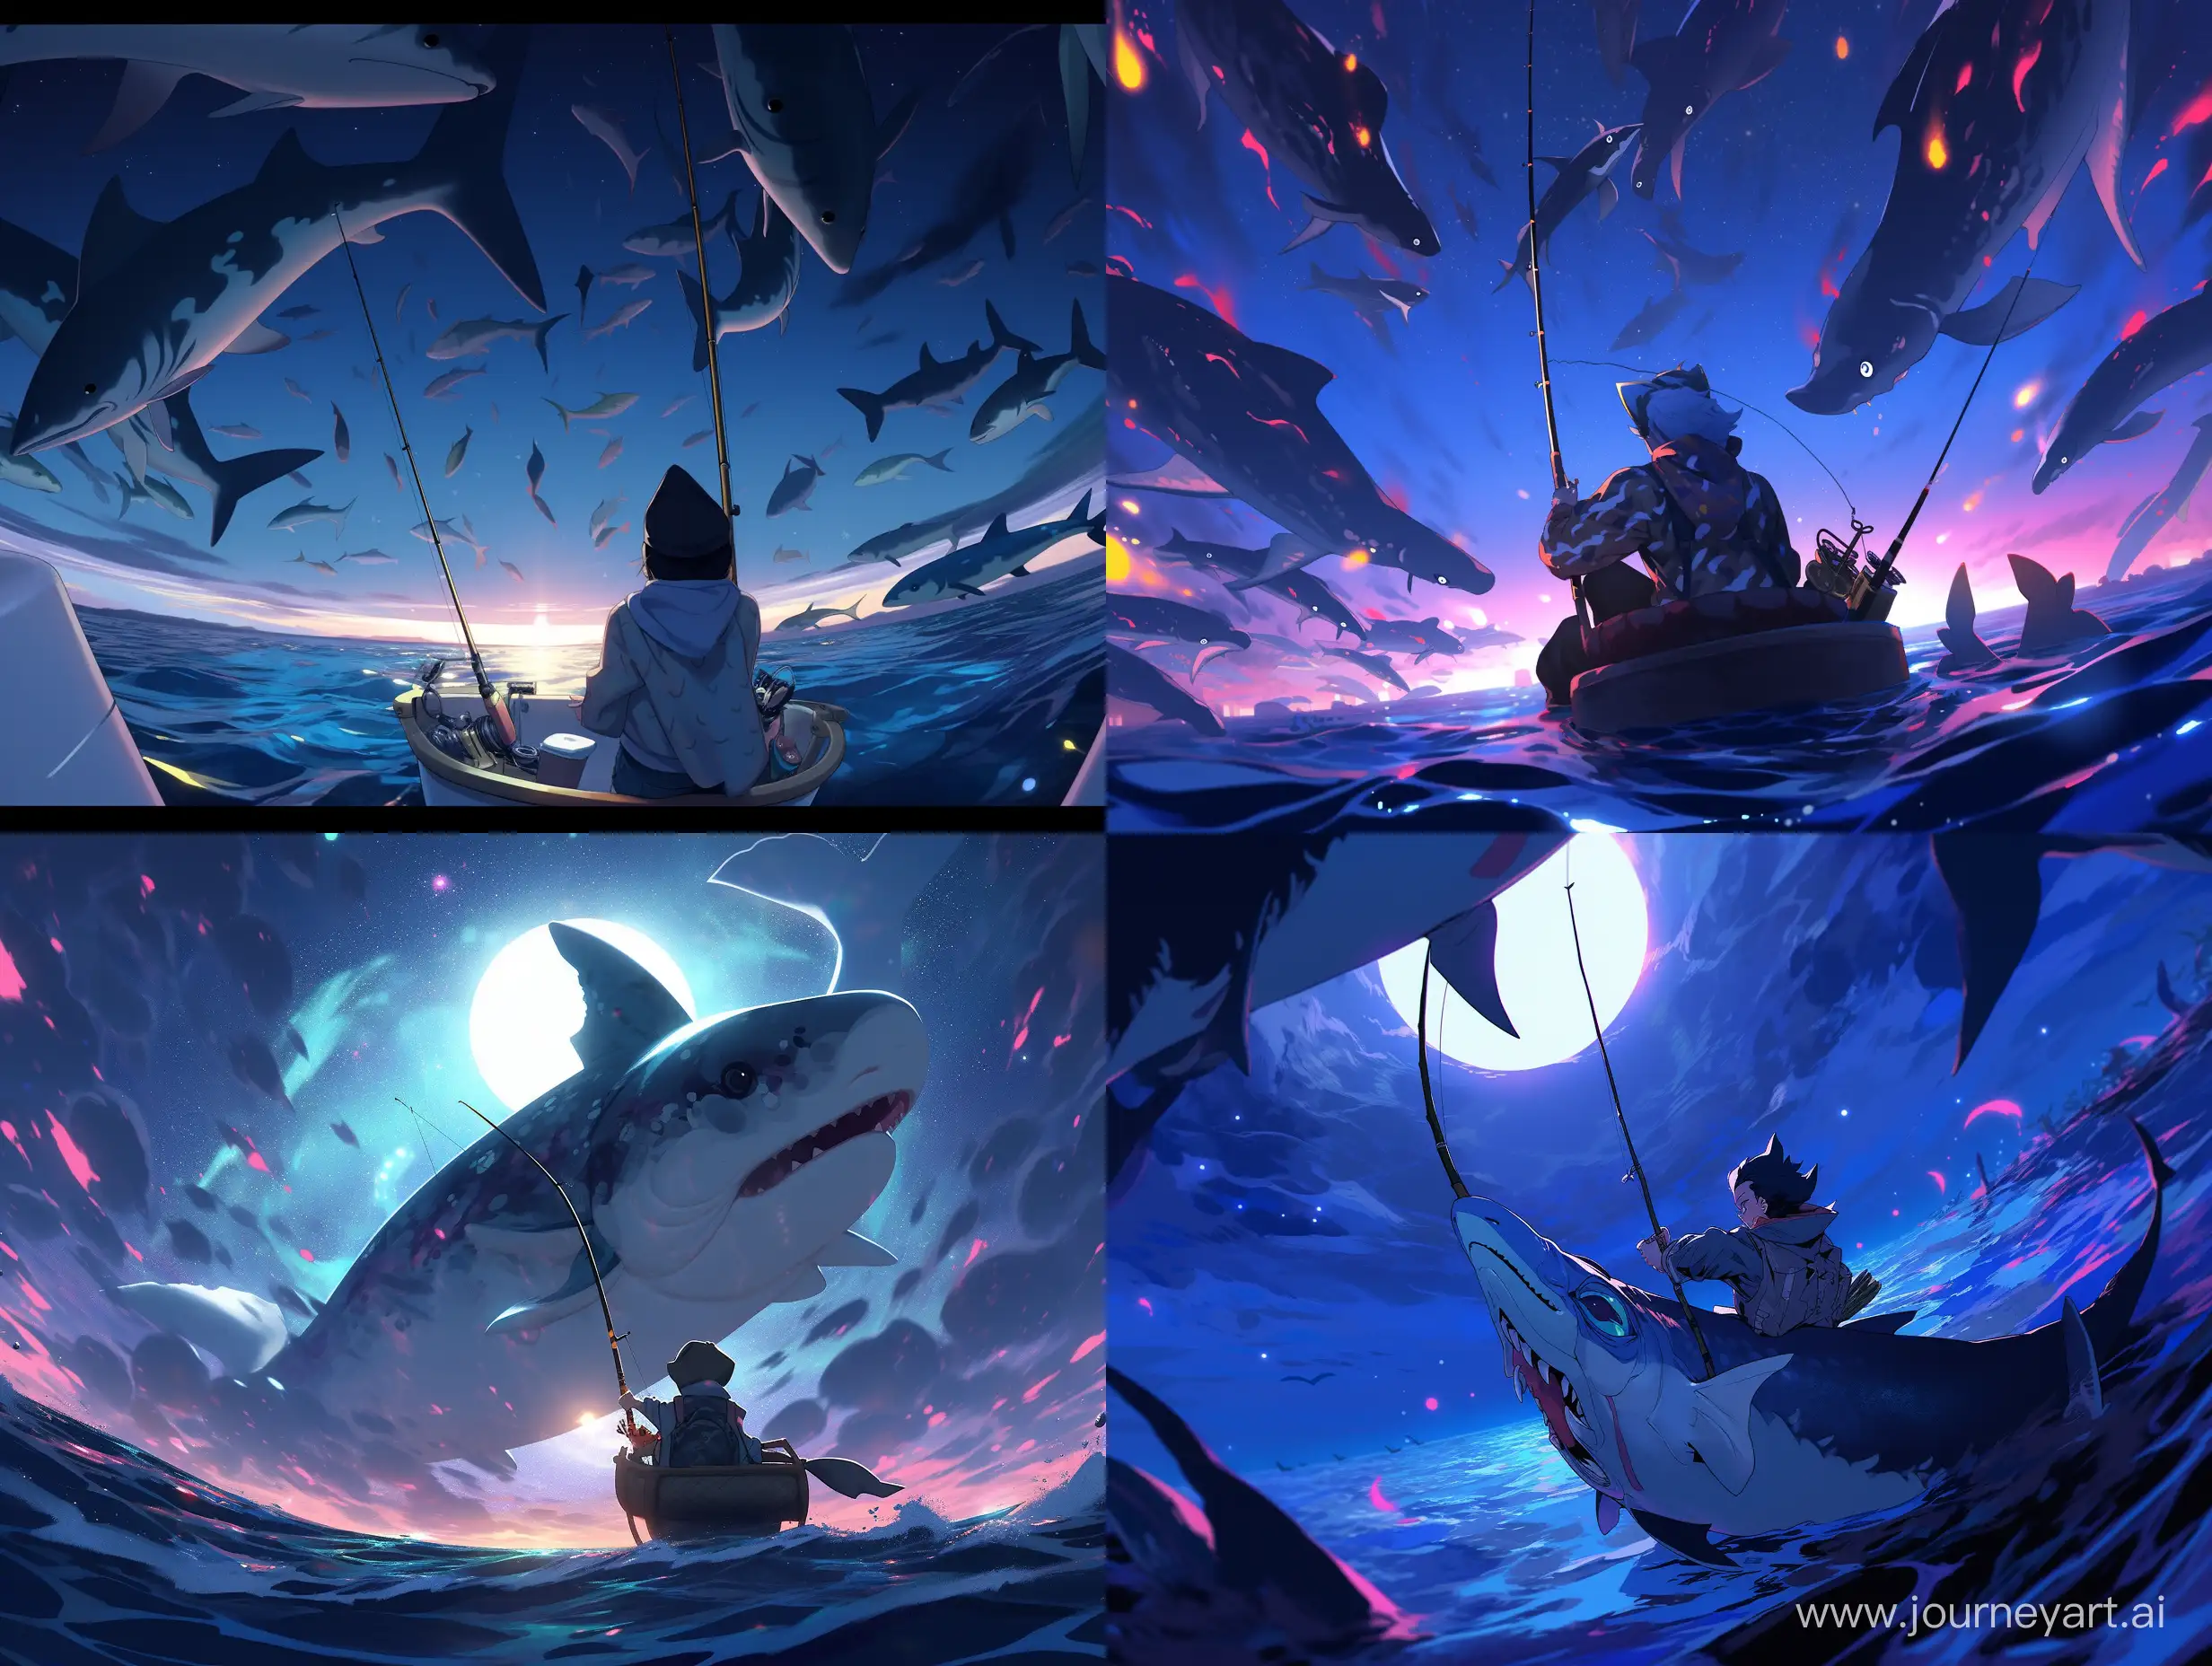 first person perspective, while fishing in the ocean at night and reeling in a dolphin, epic, --niji 5